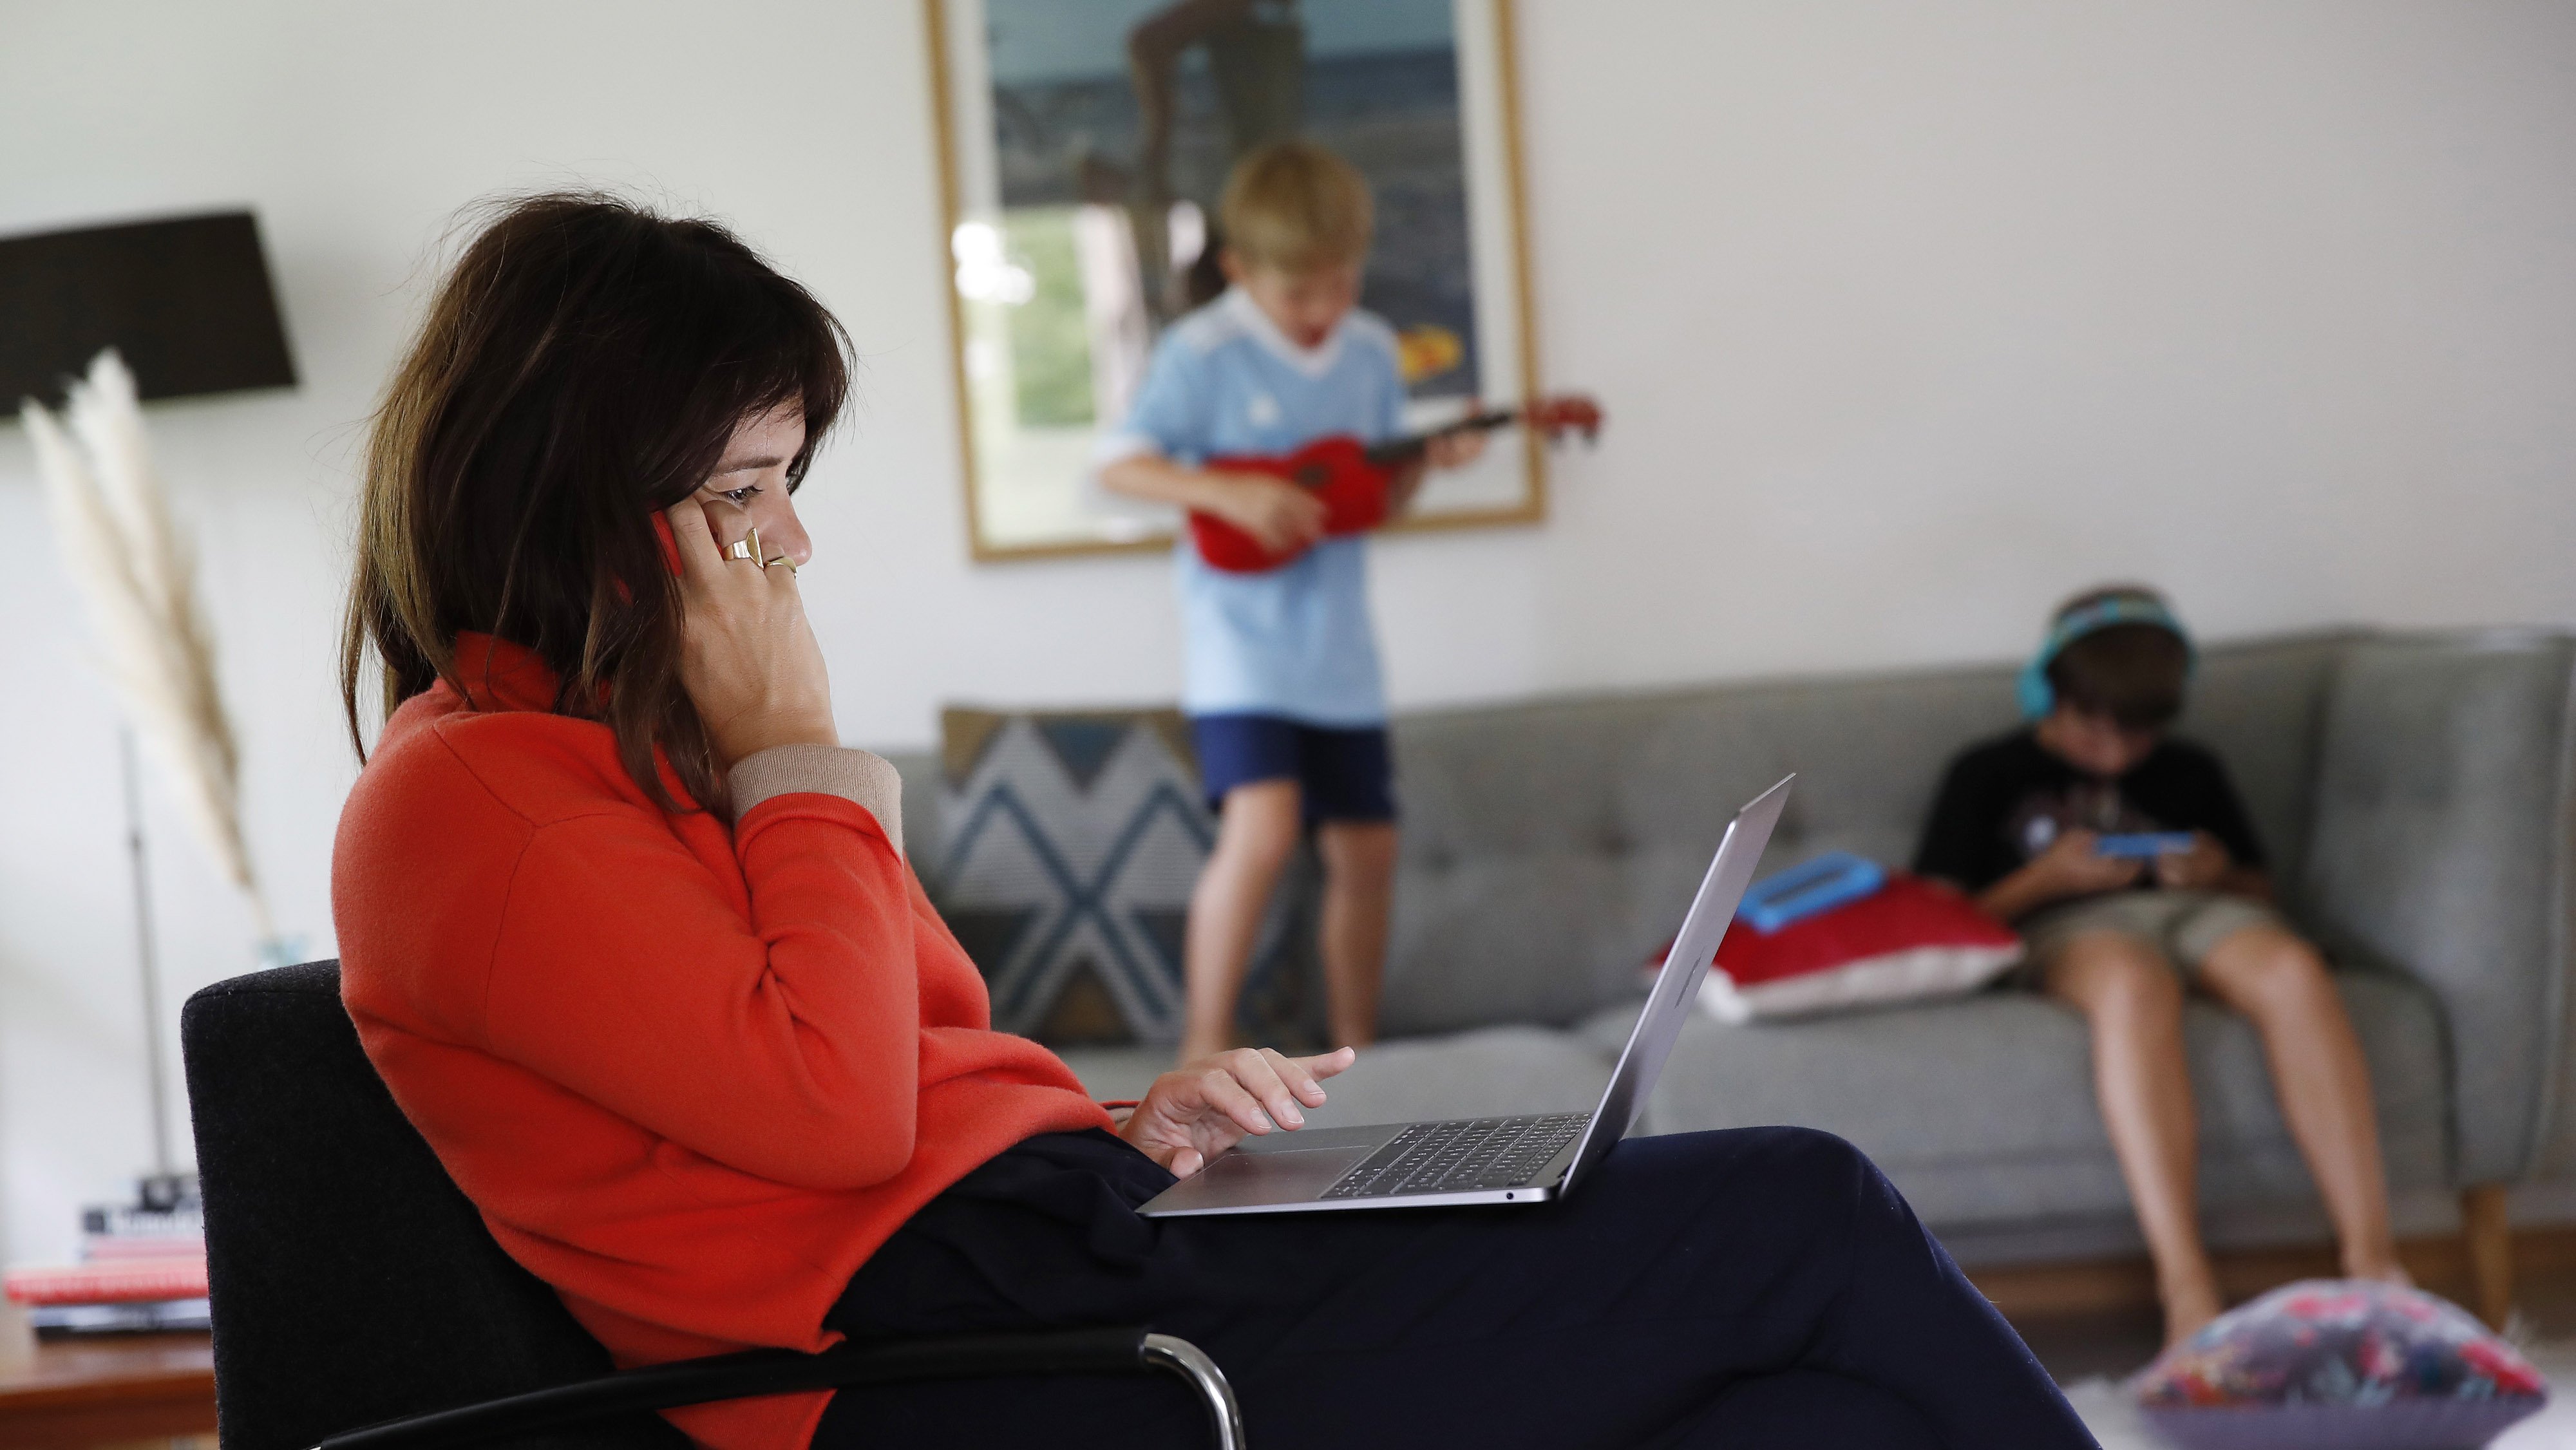 Virus Pandemic Creates Work From Home Culture